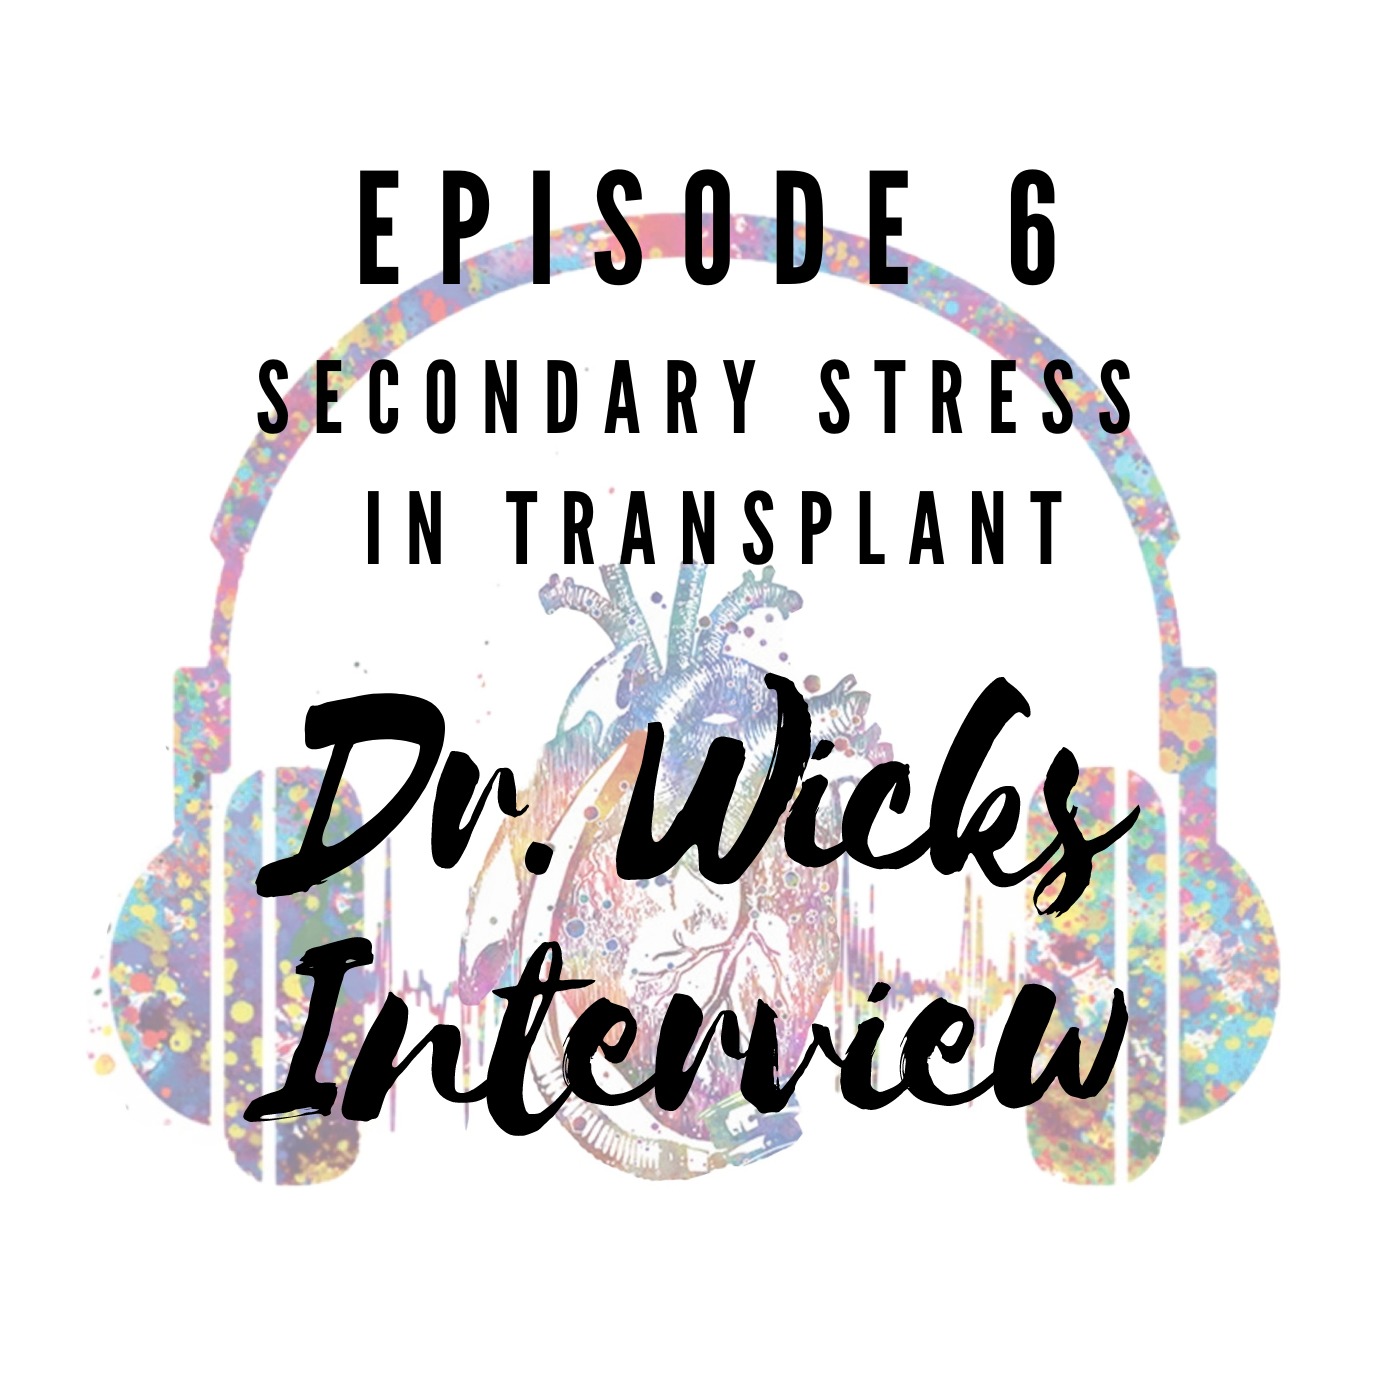 Episode 6: Secondary Stress in Transplant with Dr. Robert Wicks